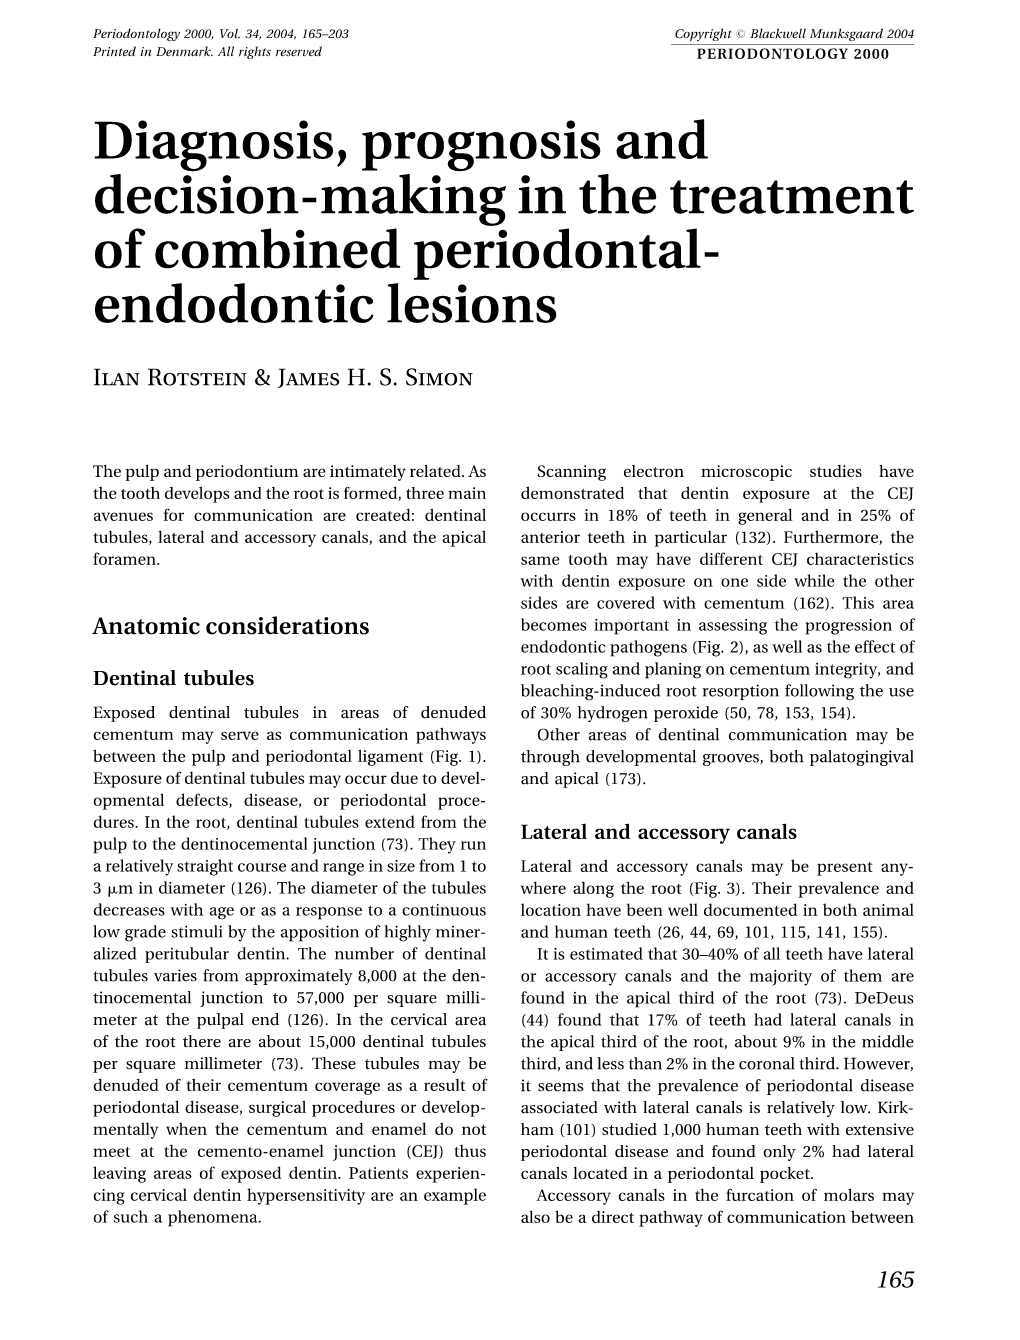 Diagnosis, Prognosis and Decision-Making in the Treatment of Combined Periodontal- Endodontic Lesions